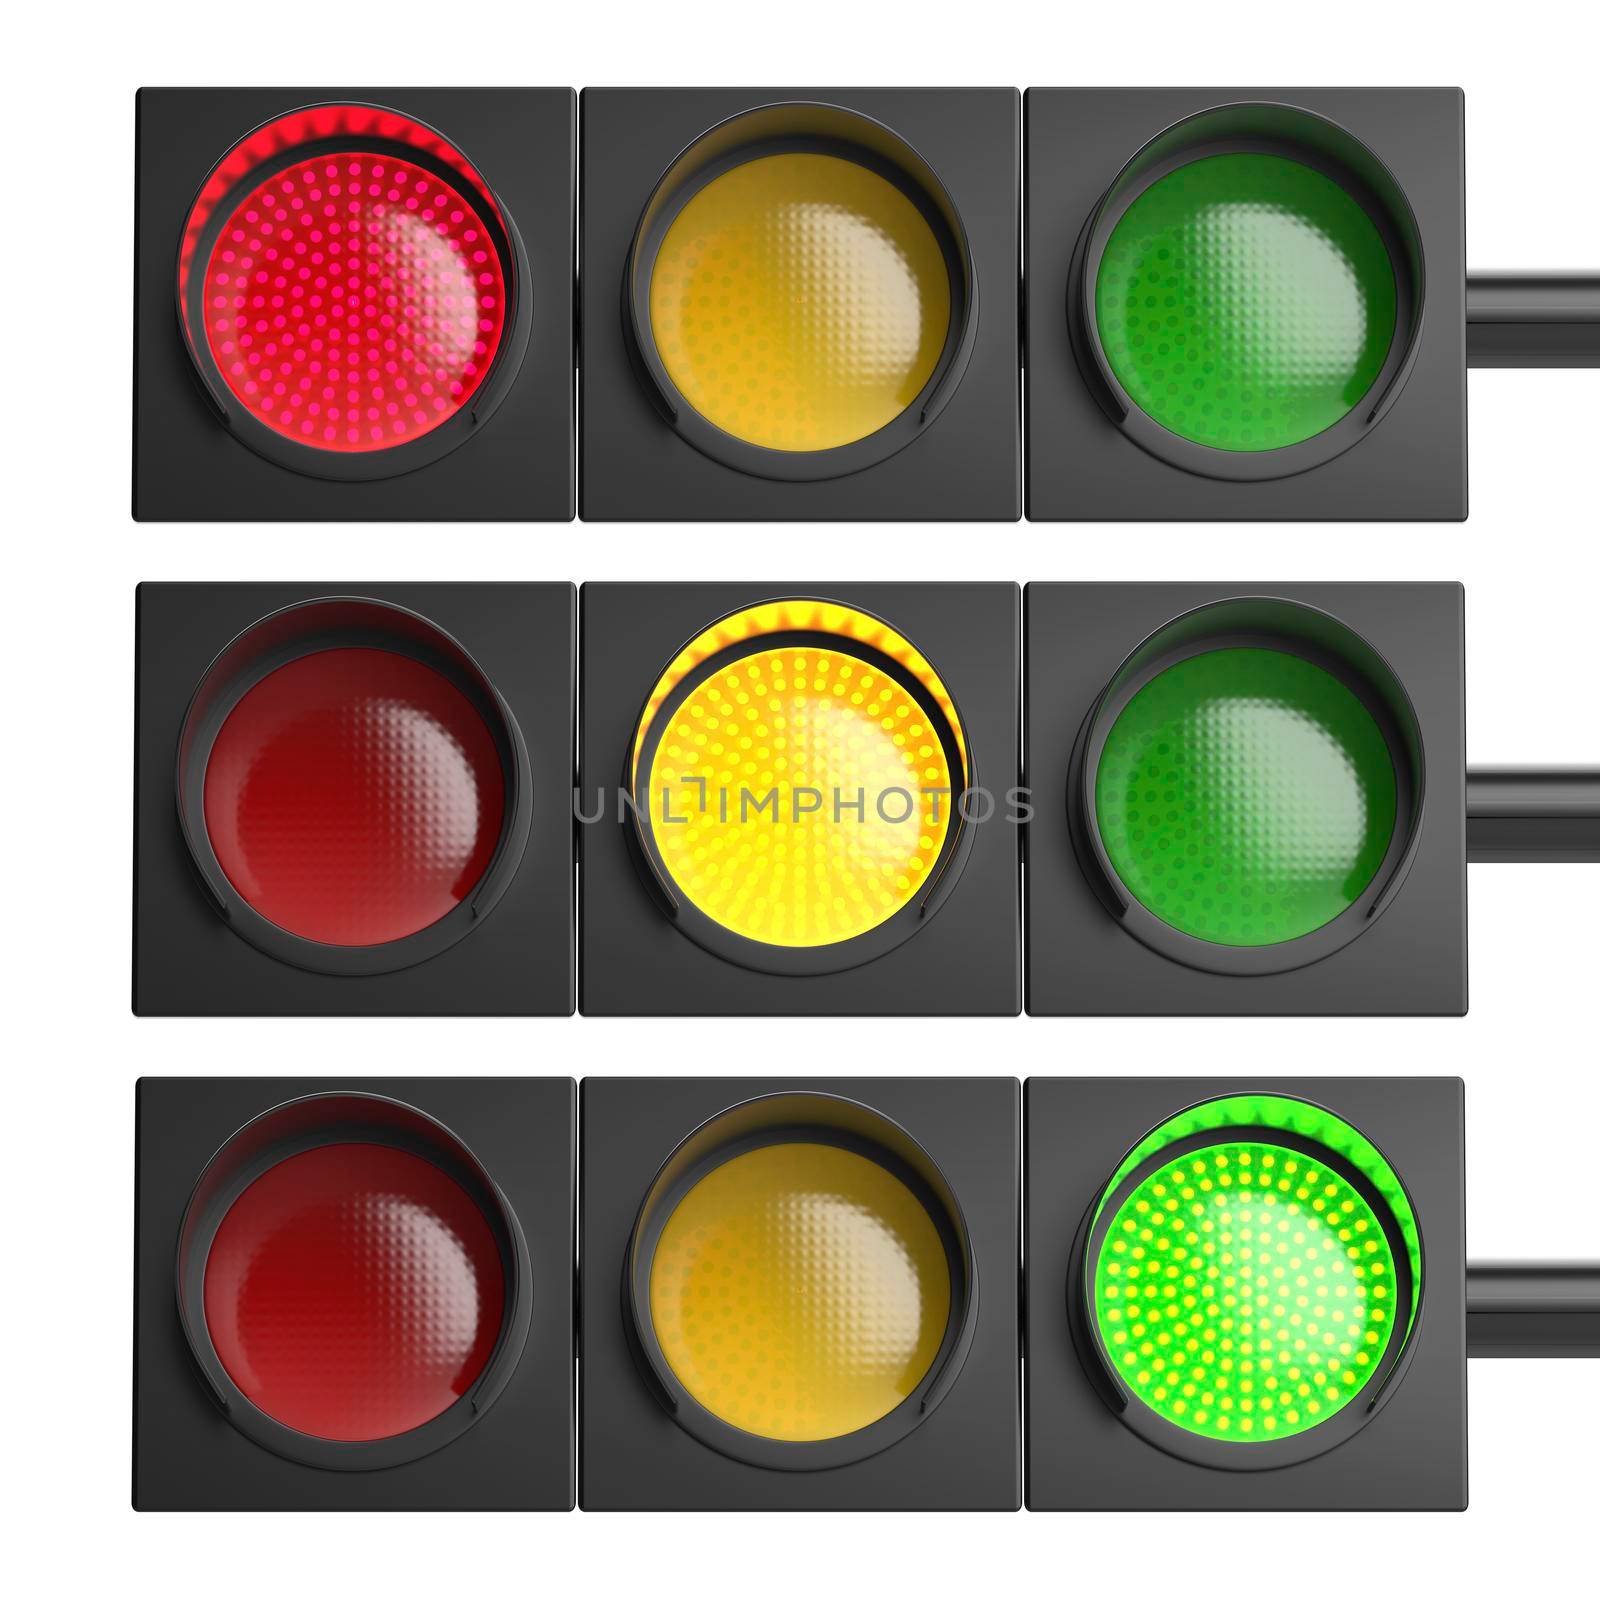 Horizontal traffic lights by magraphics